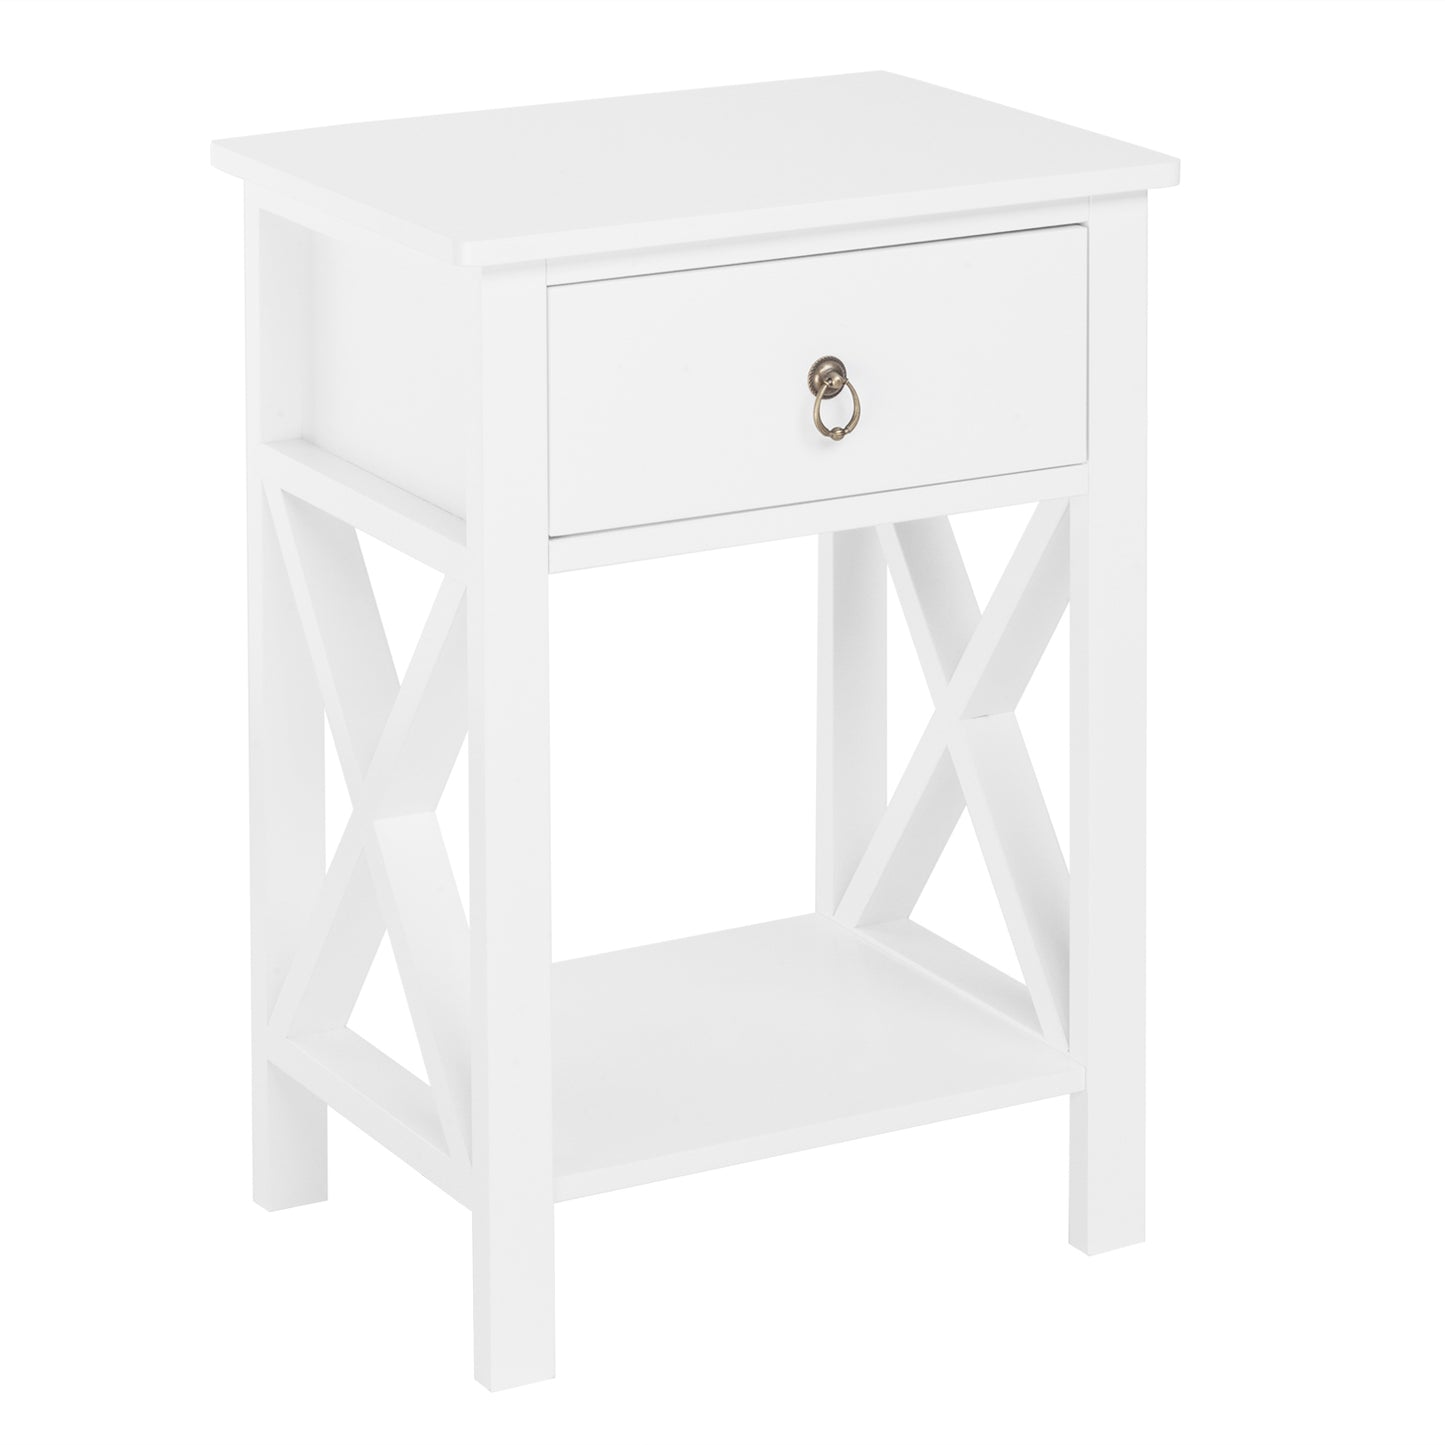 2-Tier Side Table with 1 Drawer and Storage Shelf, Nightstand with Mental Handle, Bedside Table End Table, Modern Night Stand for Bedroom, Living Room, Home Office, White